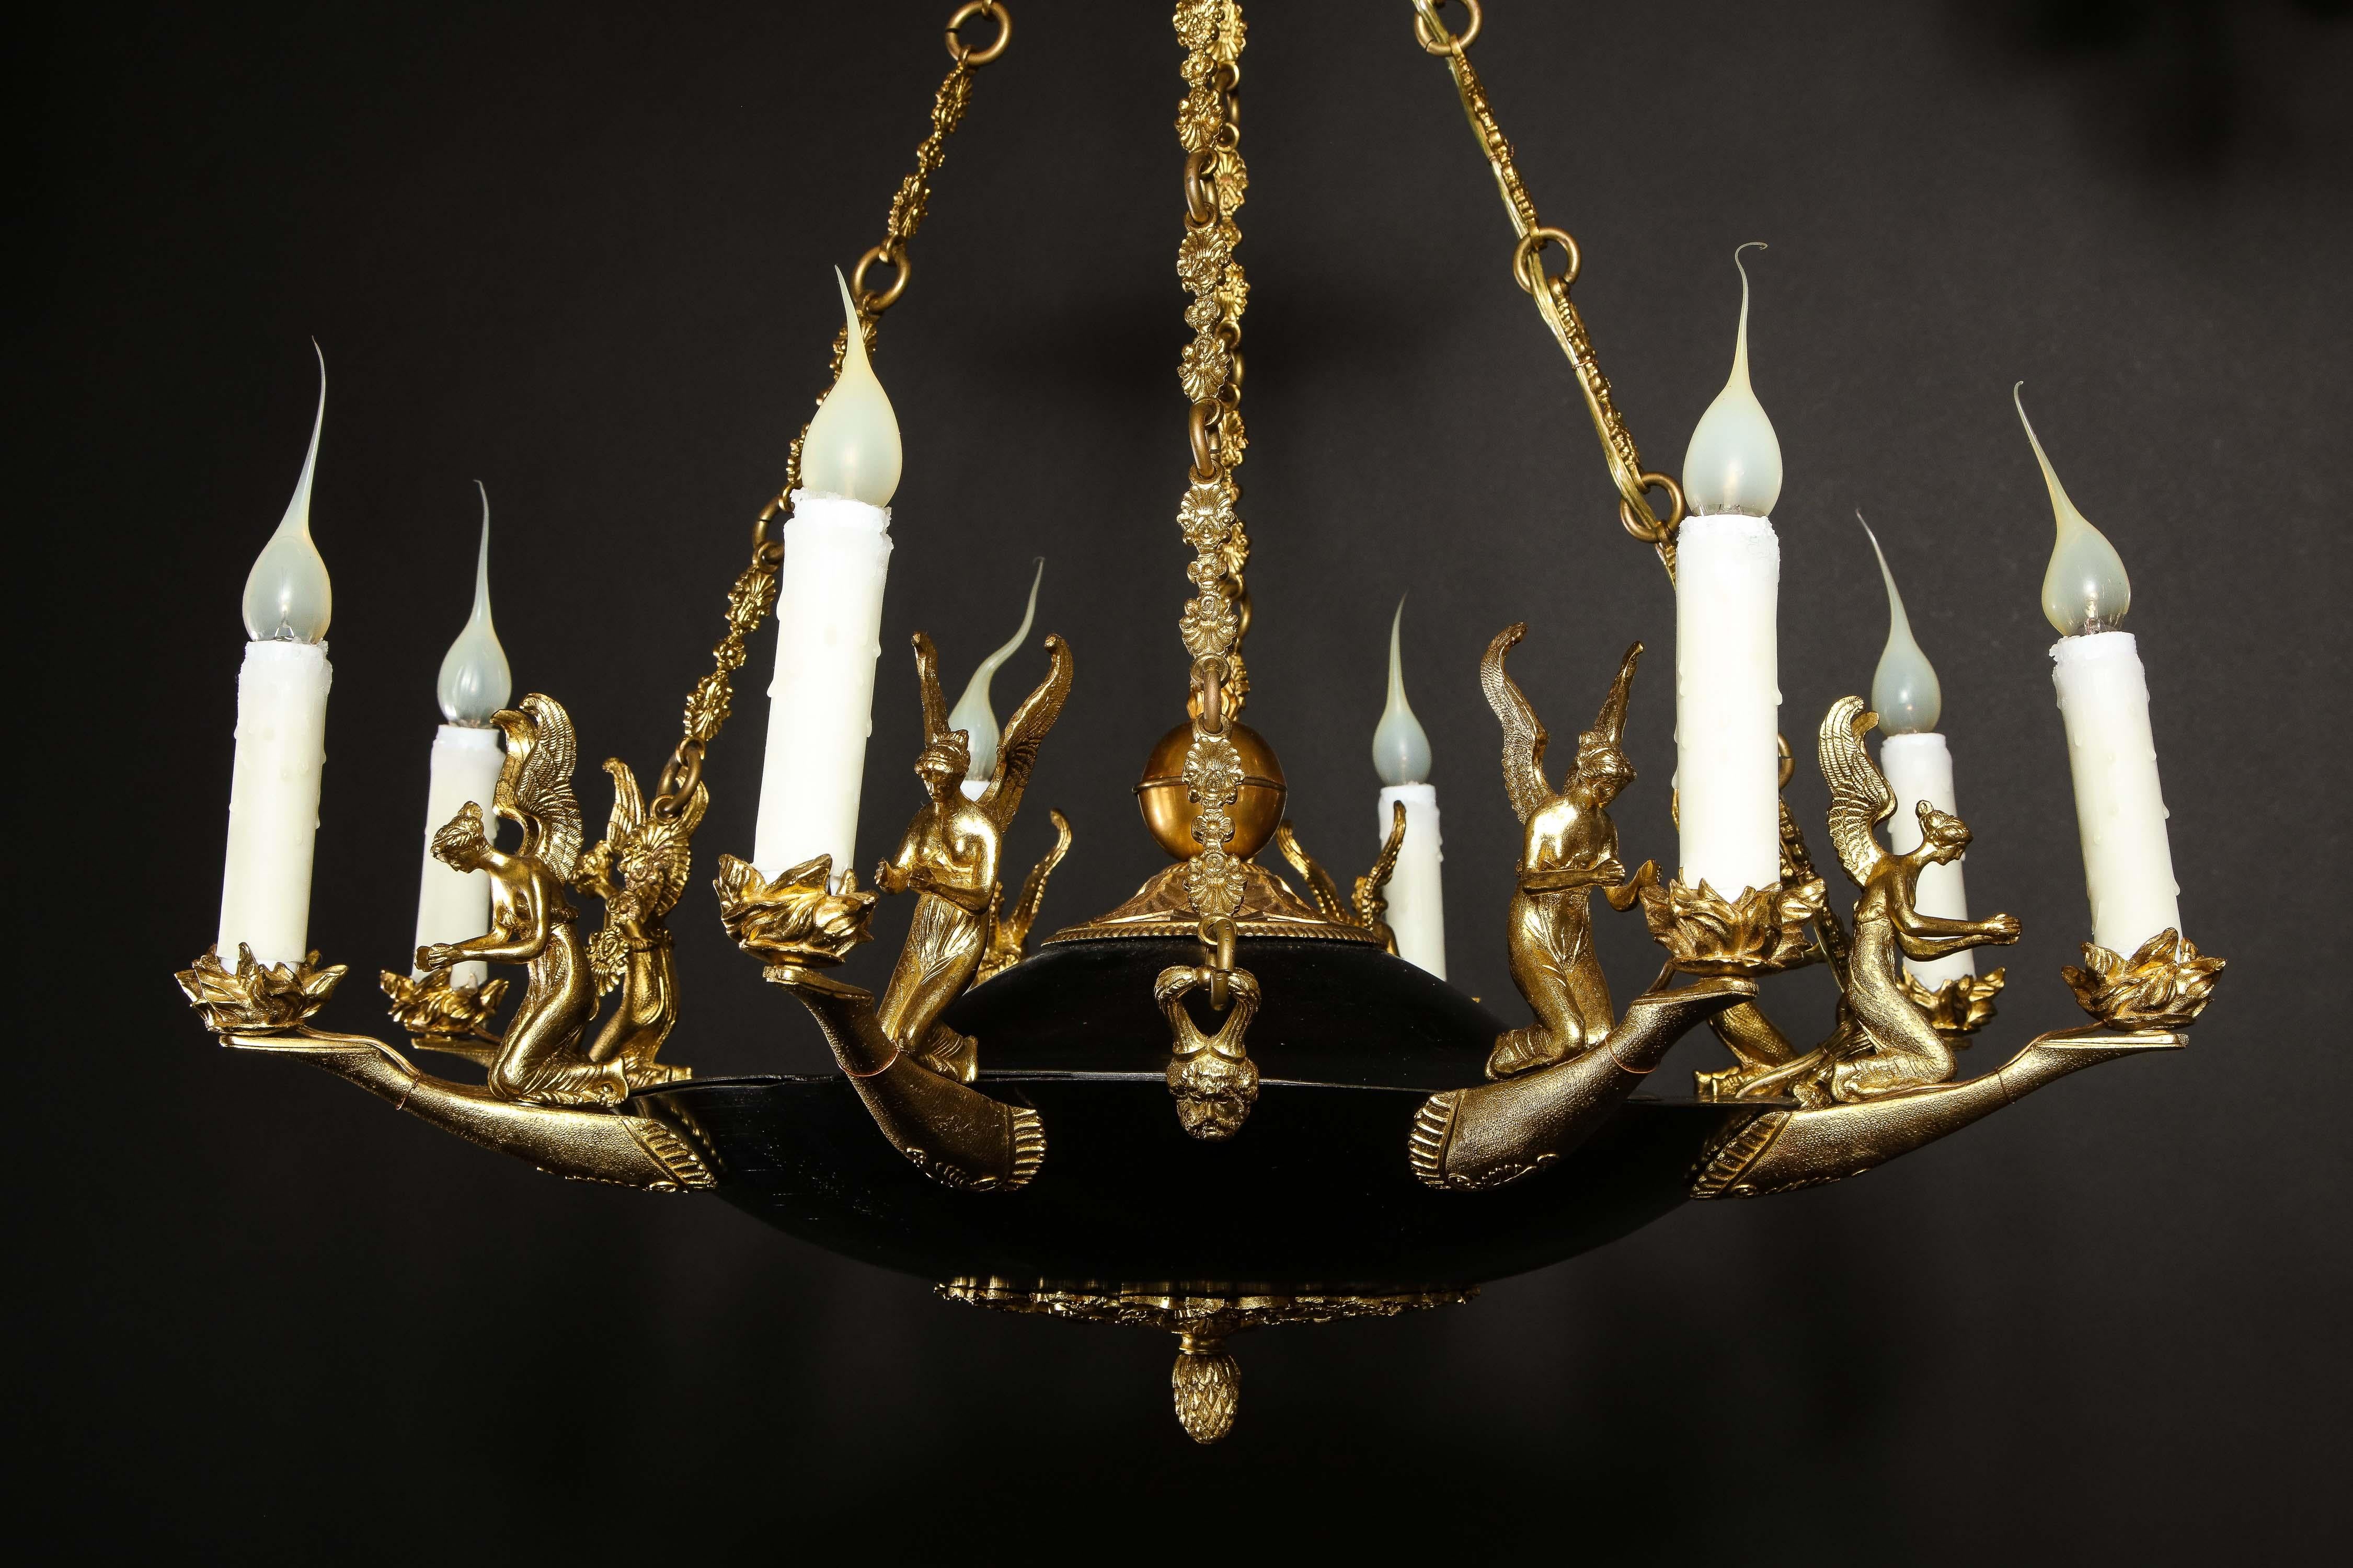 Pair of Antique French Empire Style Figural Gilt & Patina Bronze Chandeliers For Sale 15